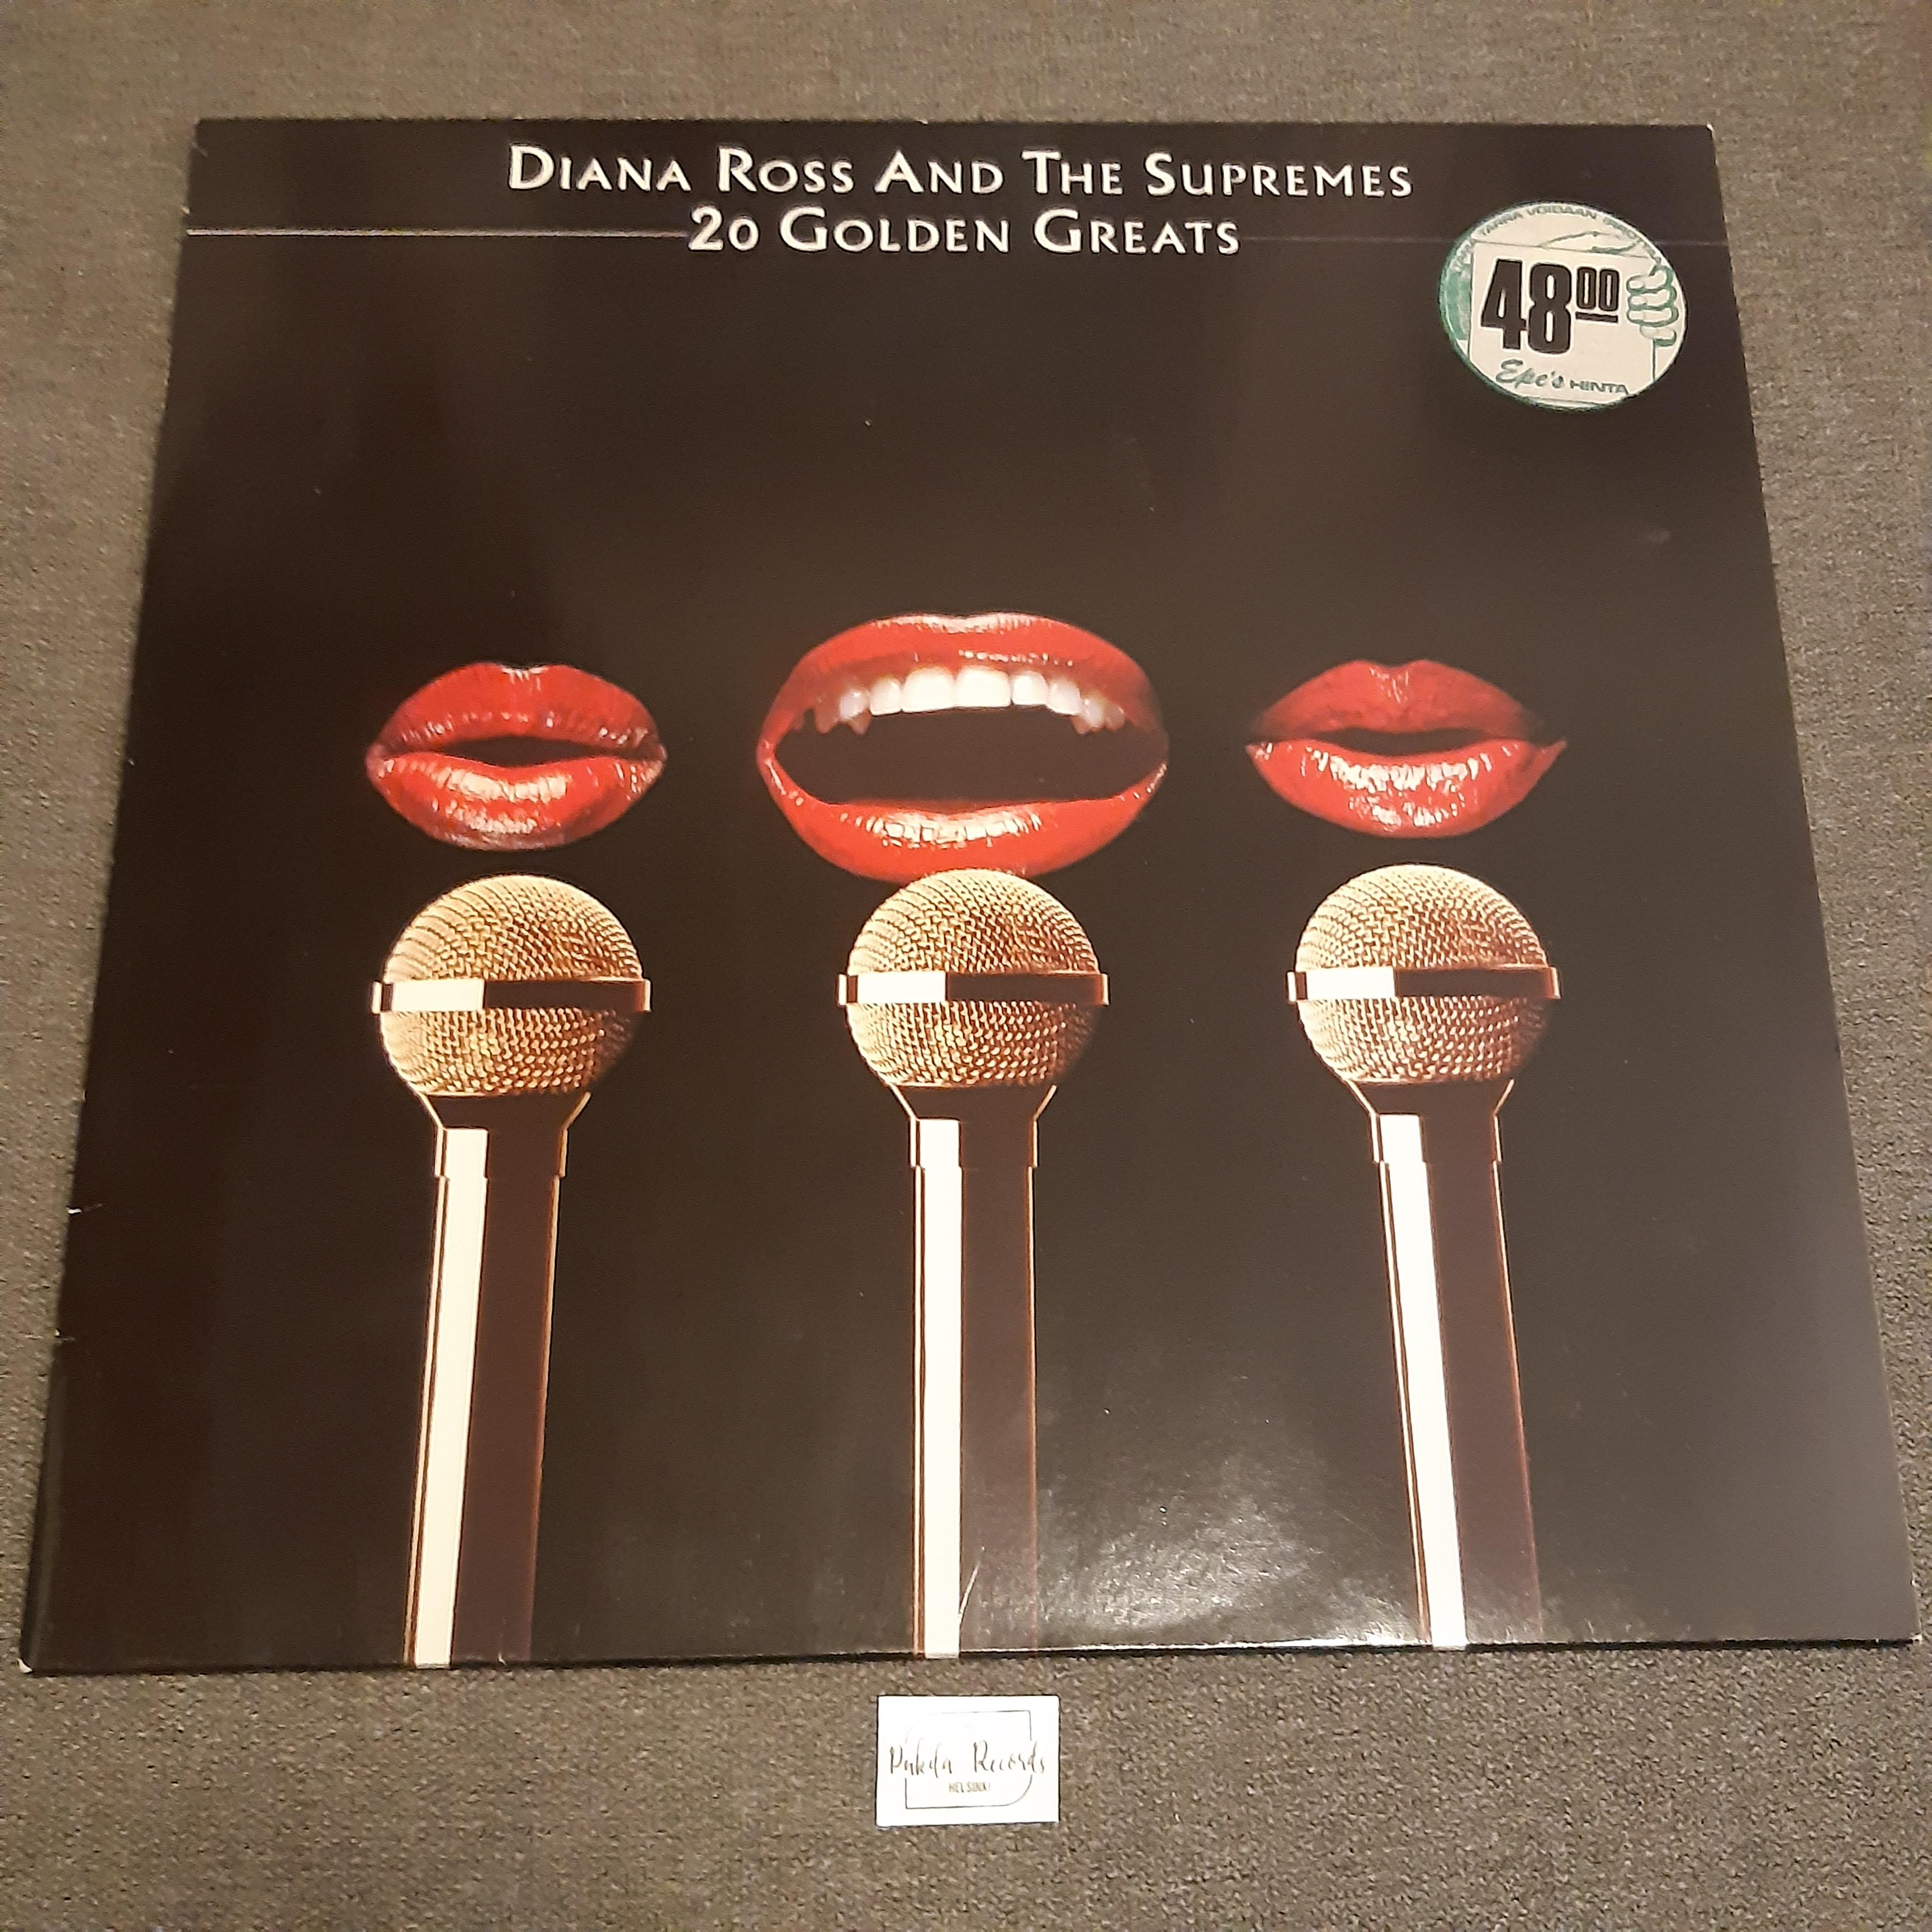 Diana Ross And The Supremes - 20 Golden Greats - LP (käytetty)